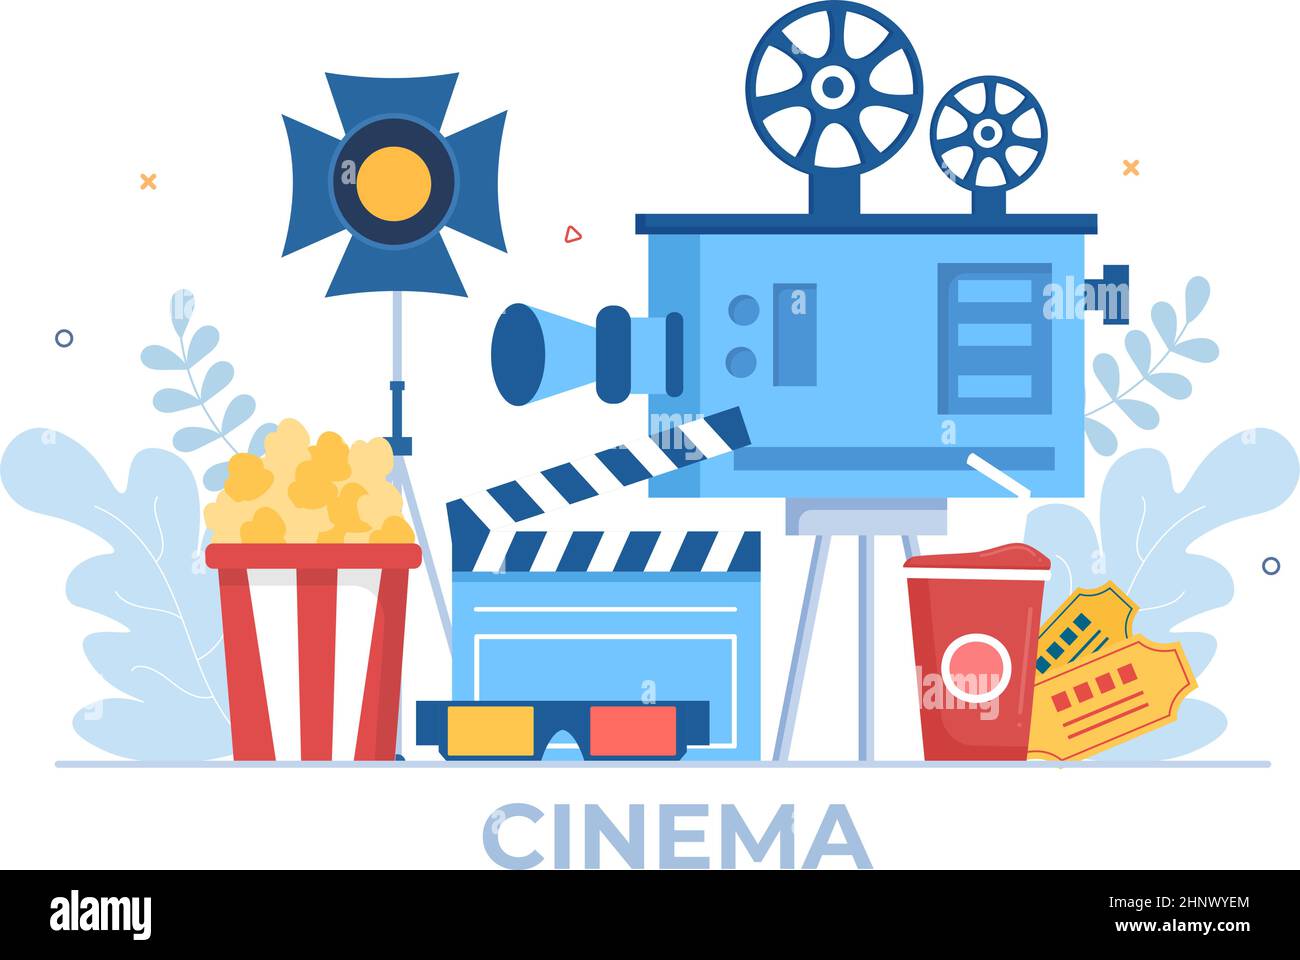 Movie Premiere Show or Cinema with Camera, Popcorn, Clapperboard, Film Tape and Reel in Flat Design Background Illustration Stock Vector